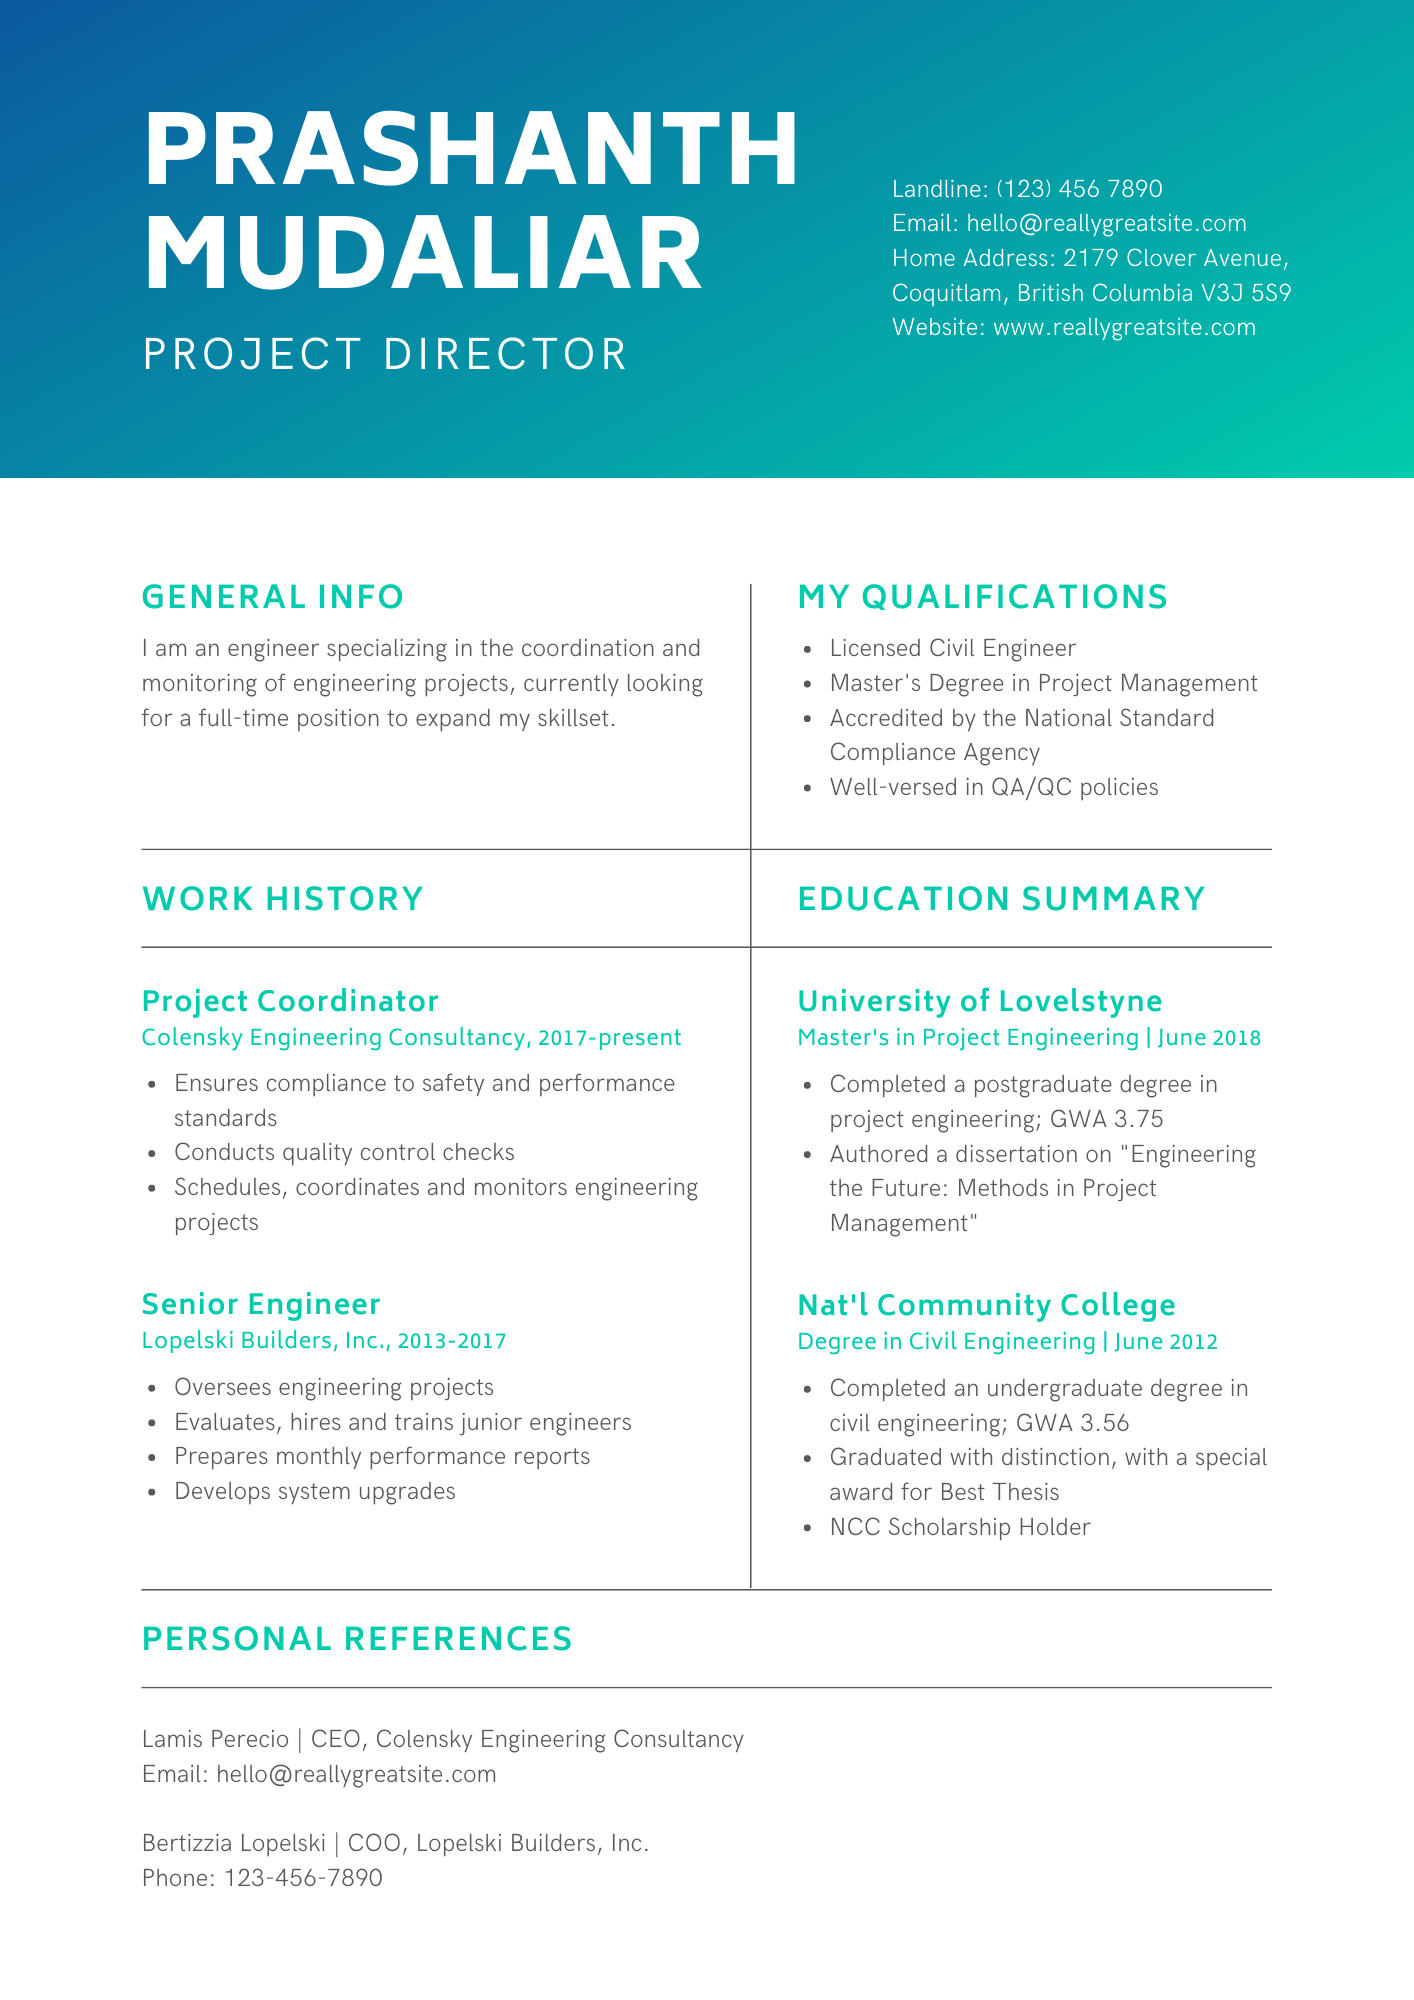 Resume Sections: How to Organize Your Resume